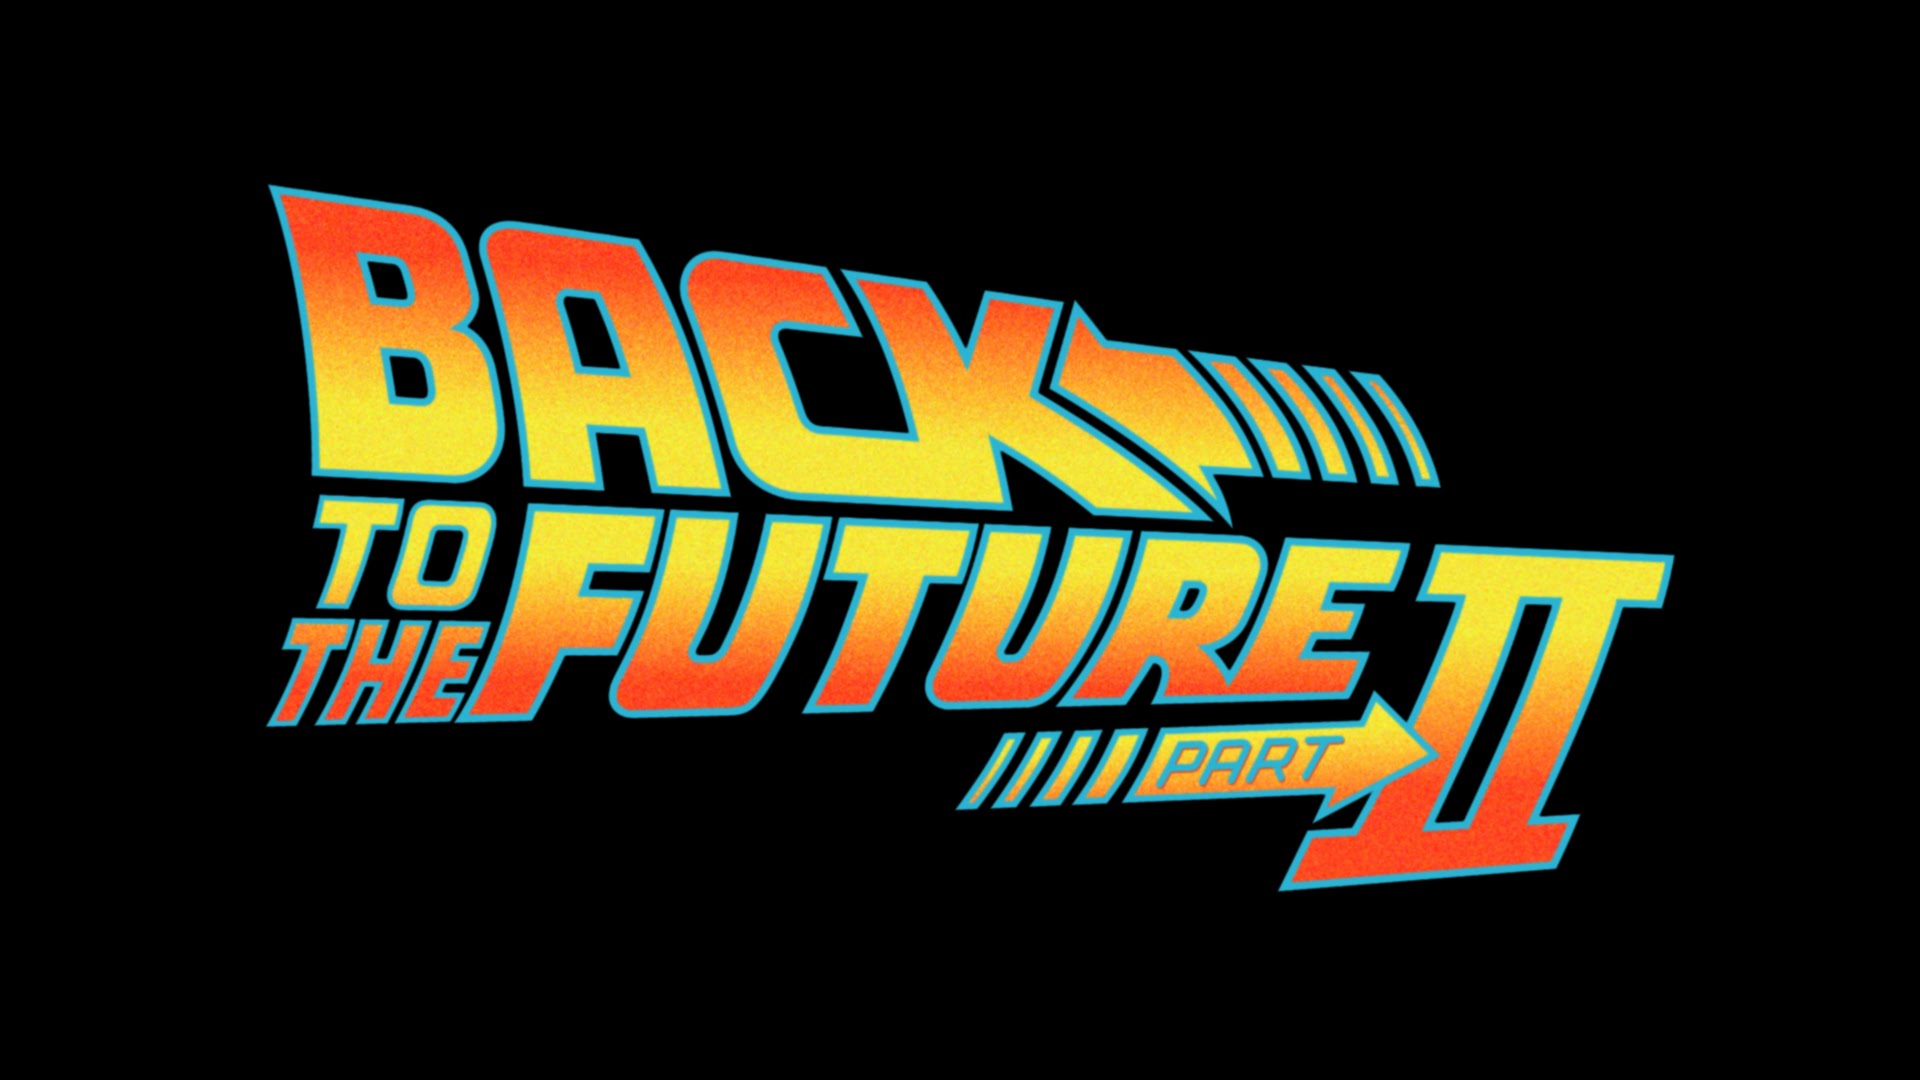 Back To The Future Part II wallpapers, Movie, HQ Back To The Future